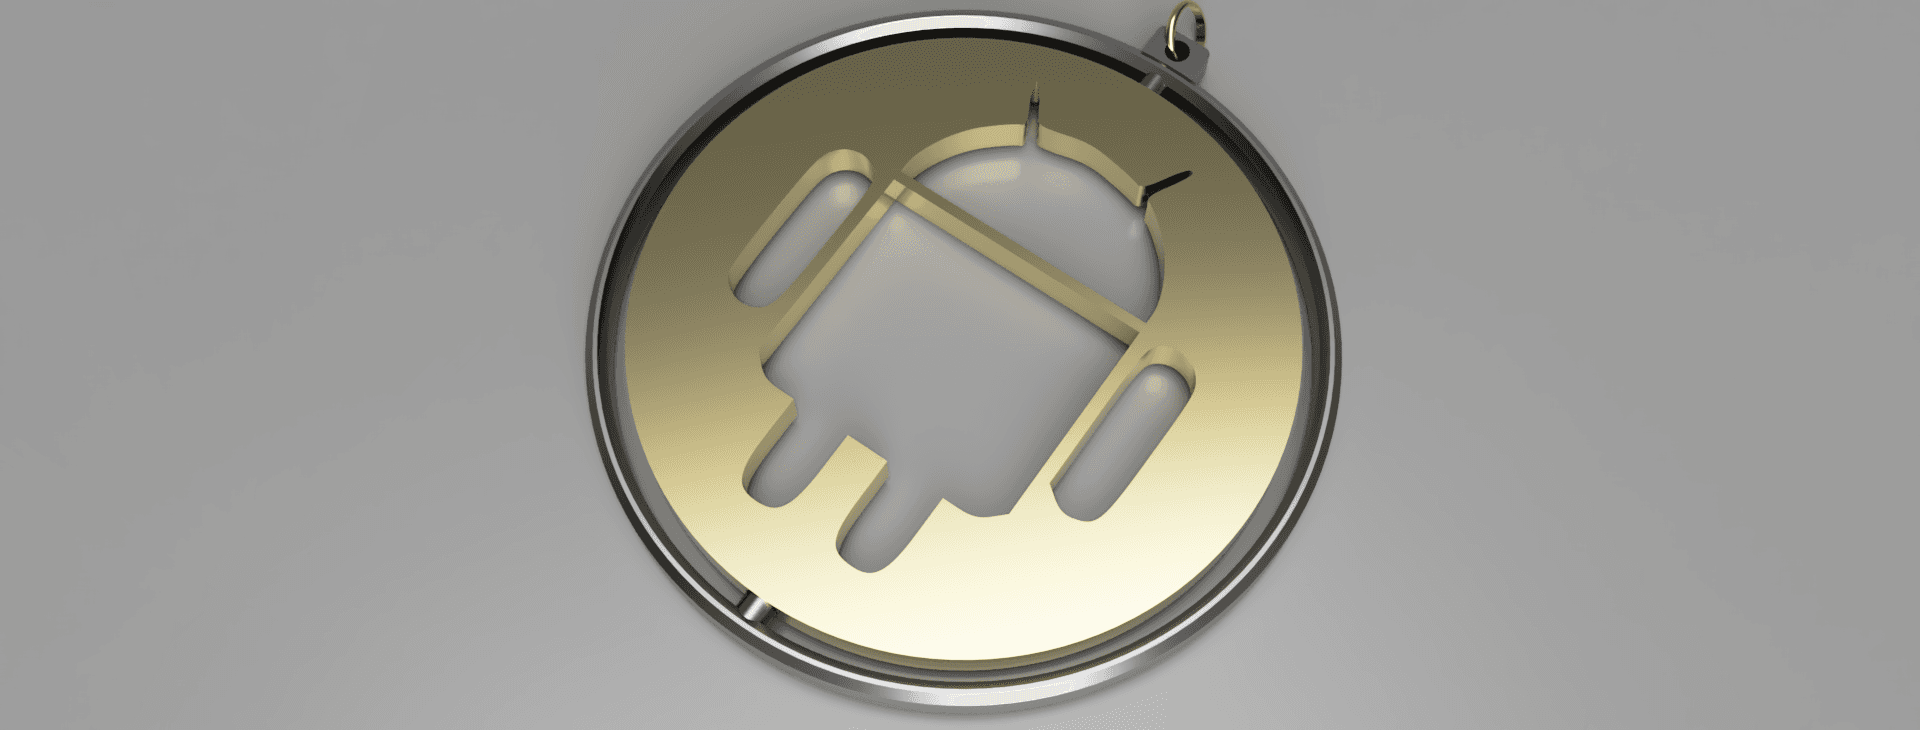 Android spinny key ring (print in place) 3d model